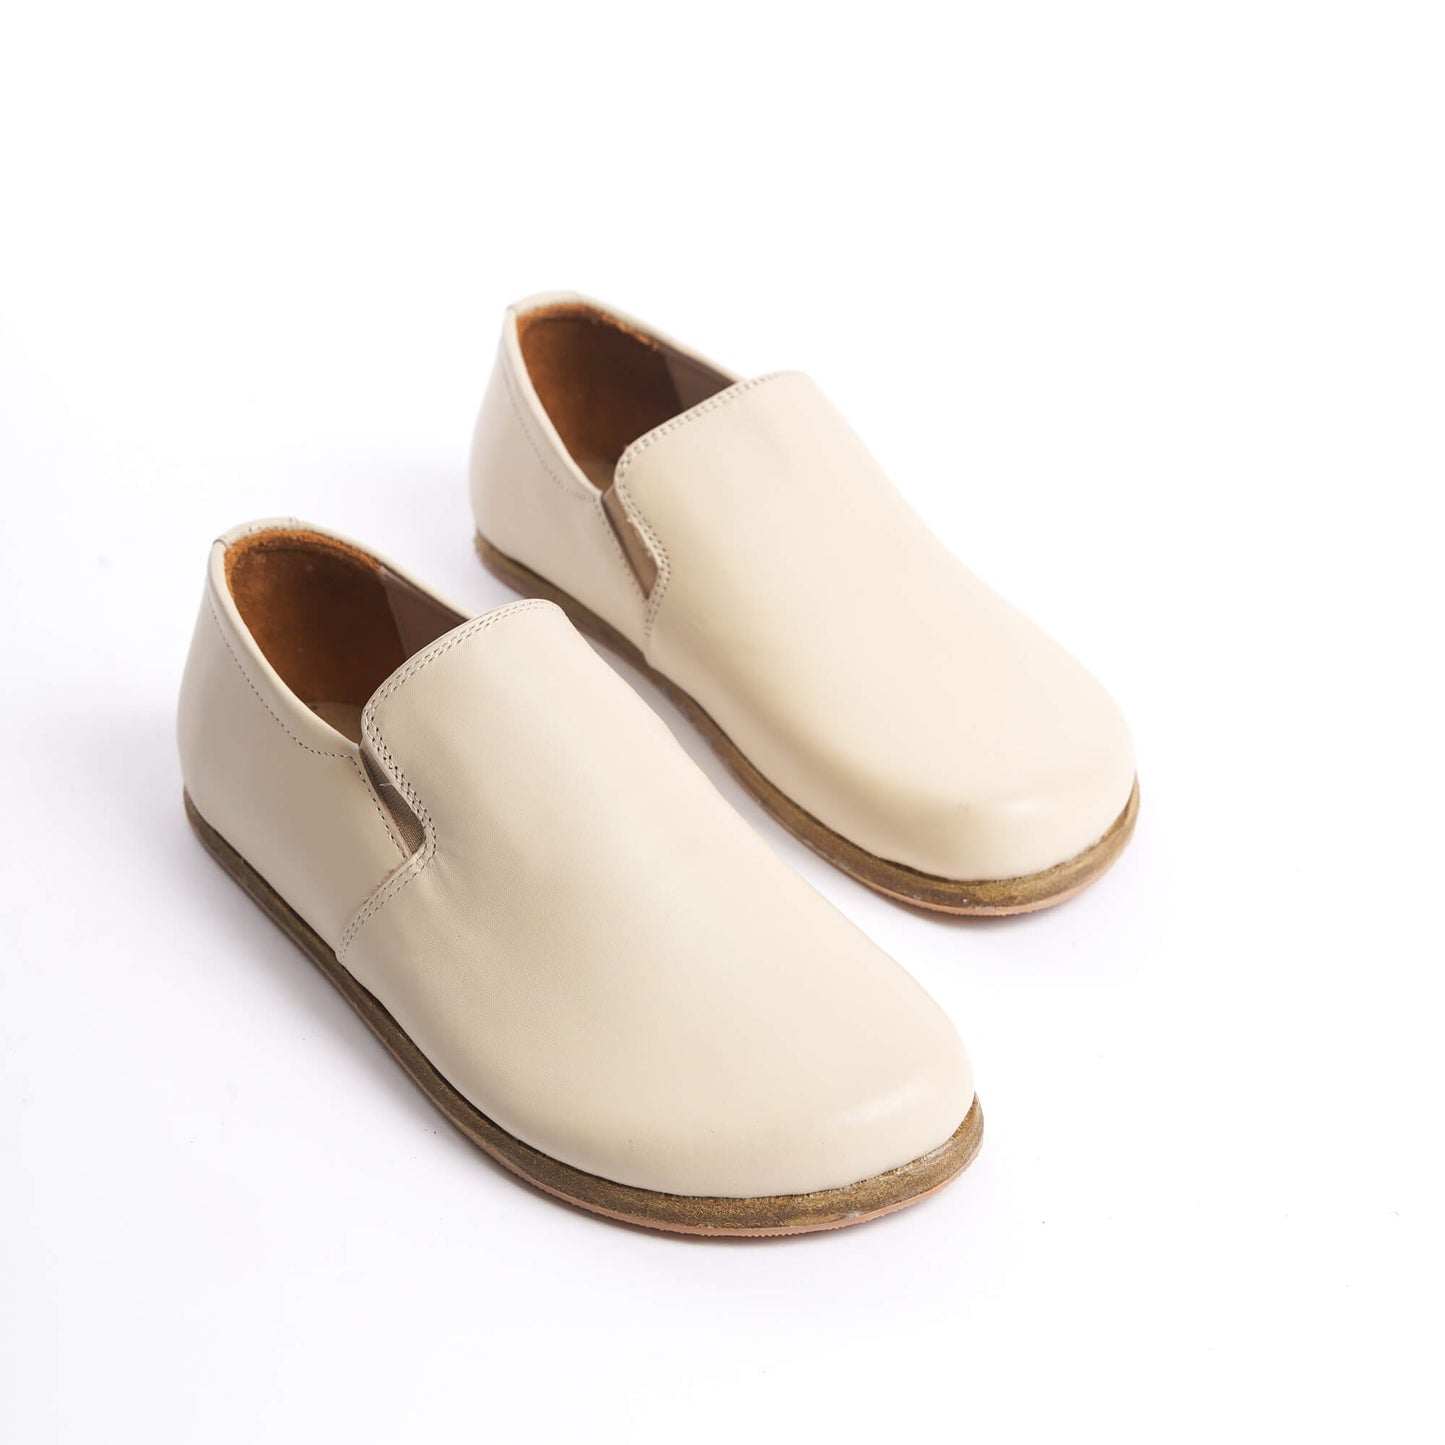 Close-up of Ionia beige loafers on white background - Discover comfort with Ionia Leather Barefoot Women Loafers in beige.